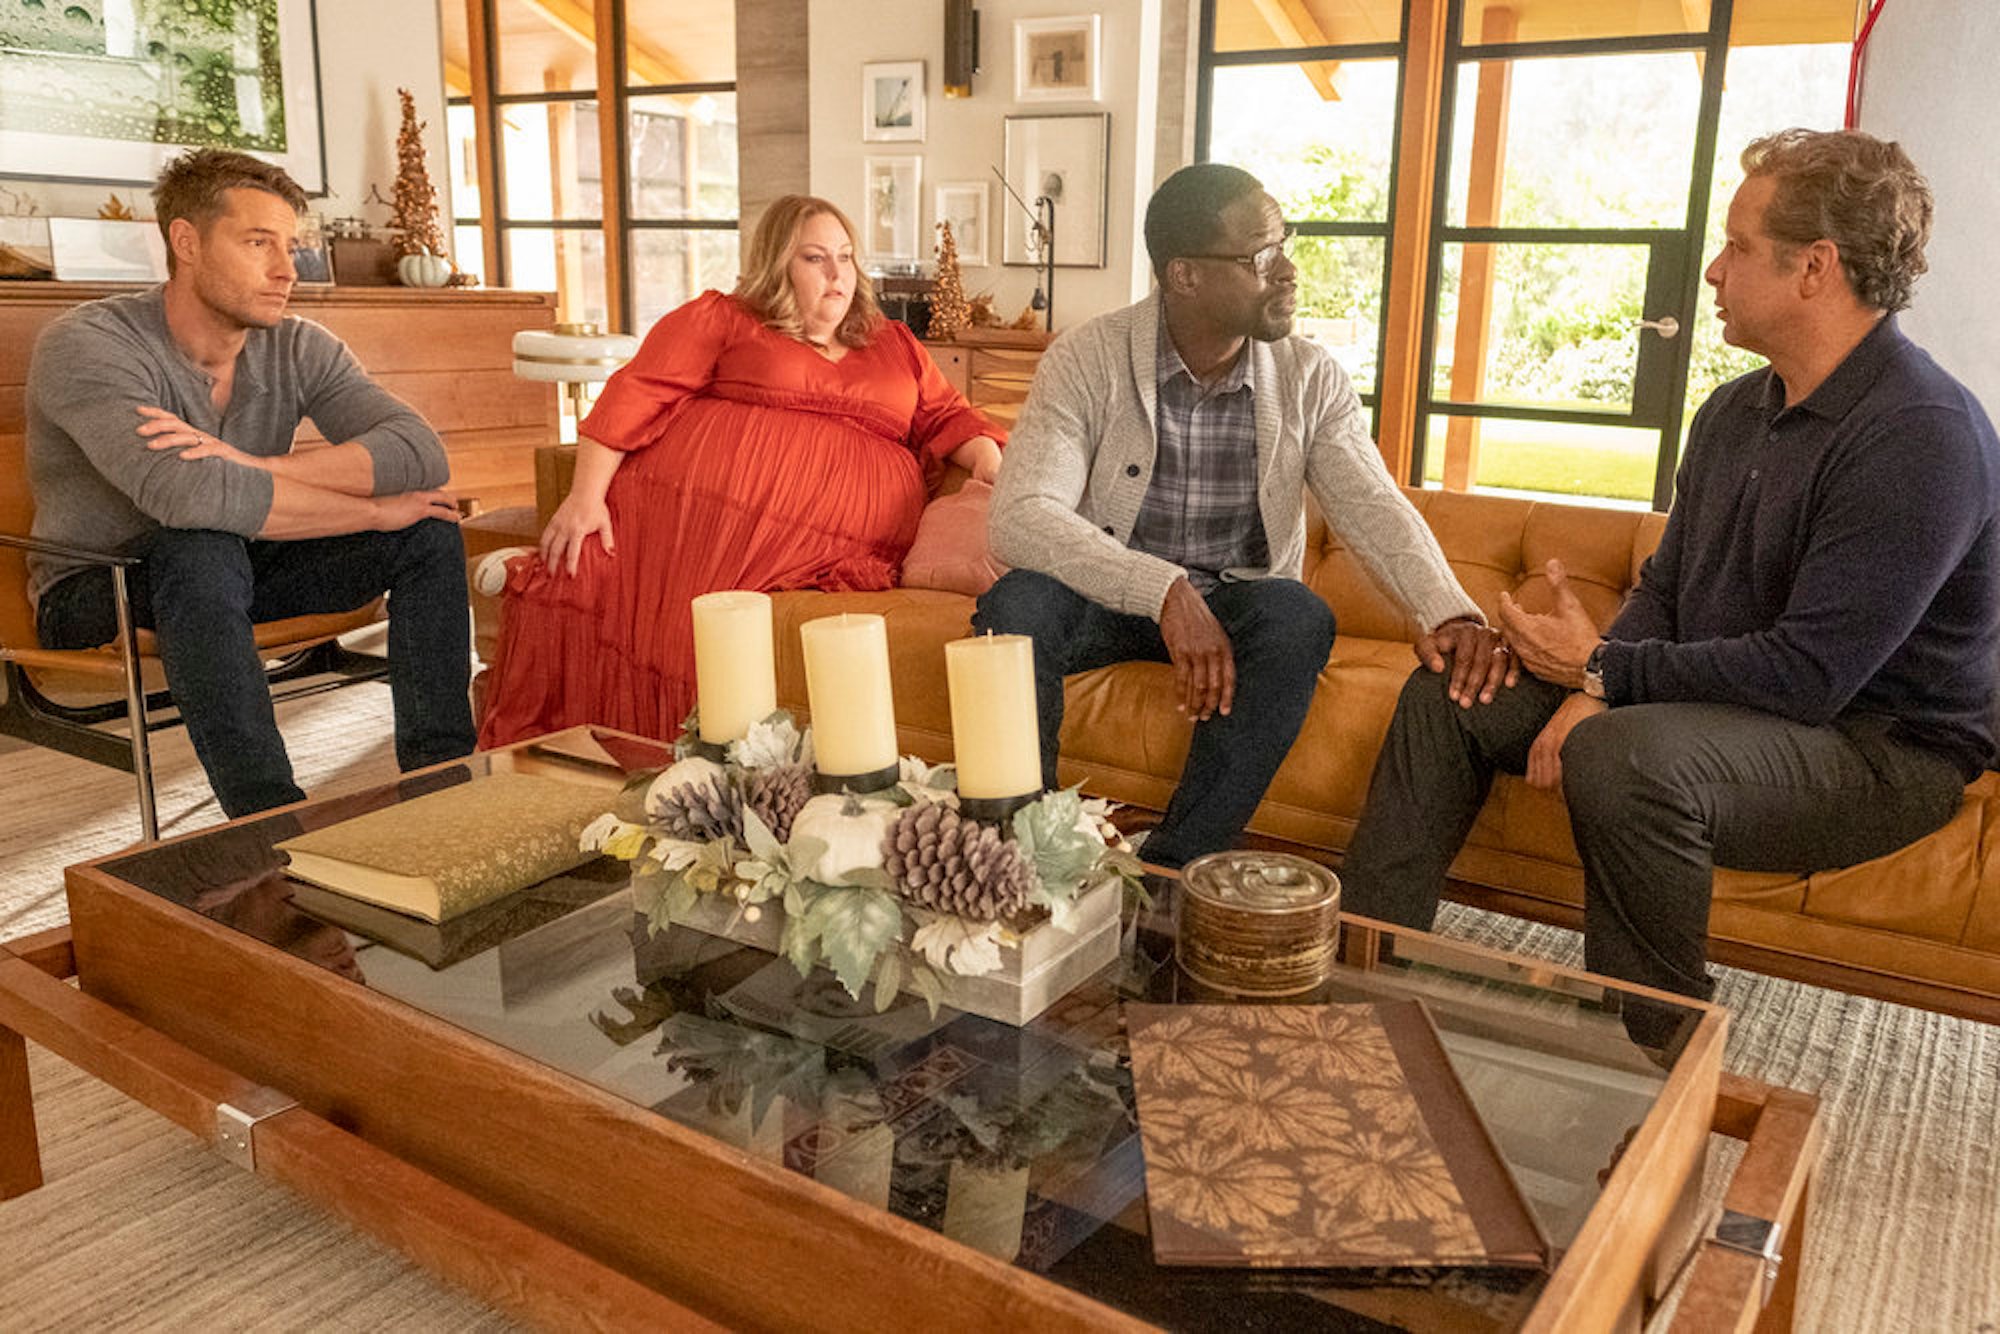 Kevin, Kate, and Randall speaking to Miguel on the couch in 'This Is Us' Season 6 Episode 15